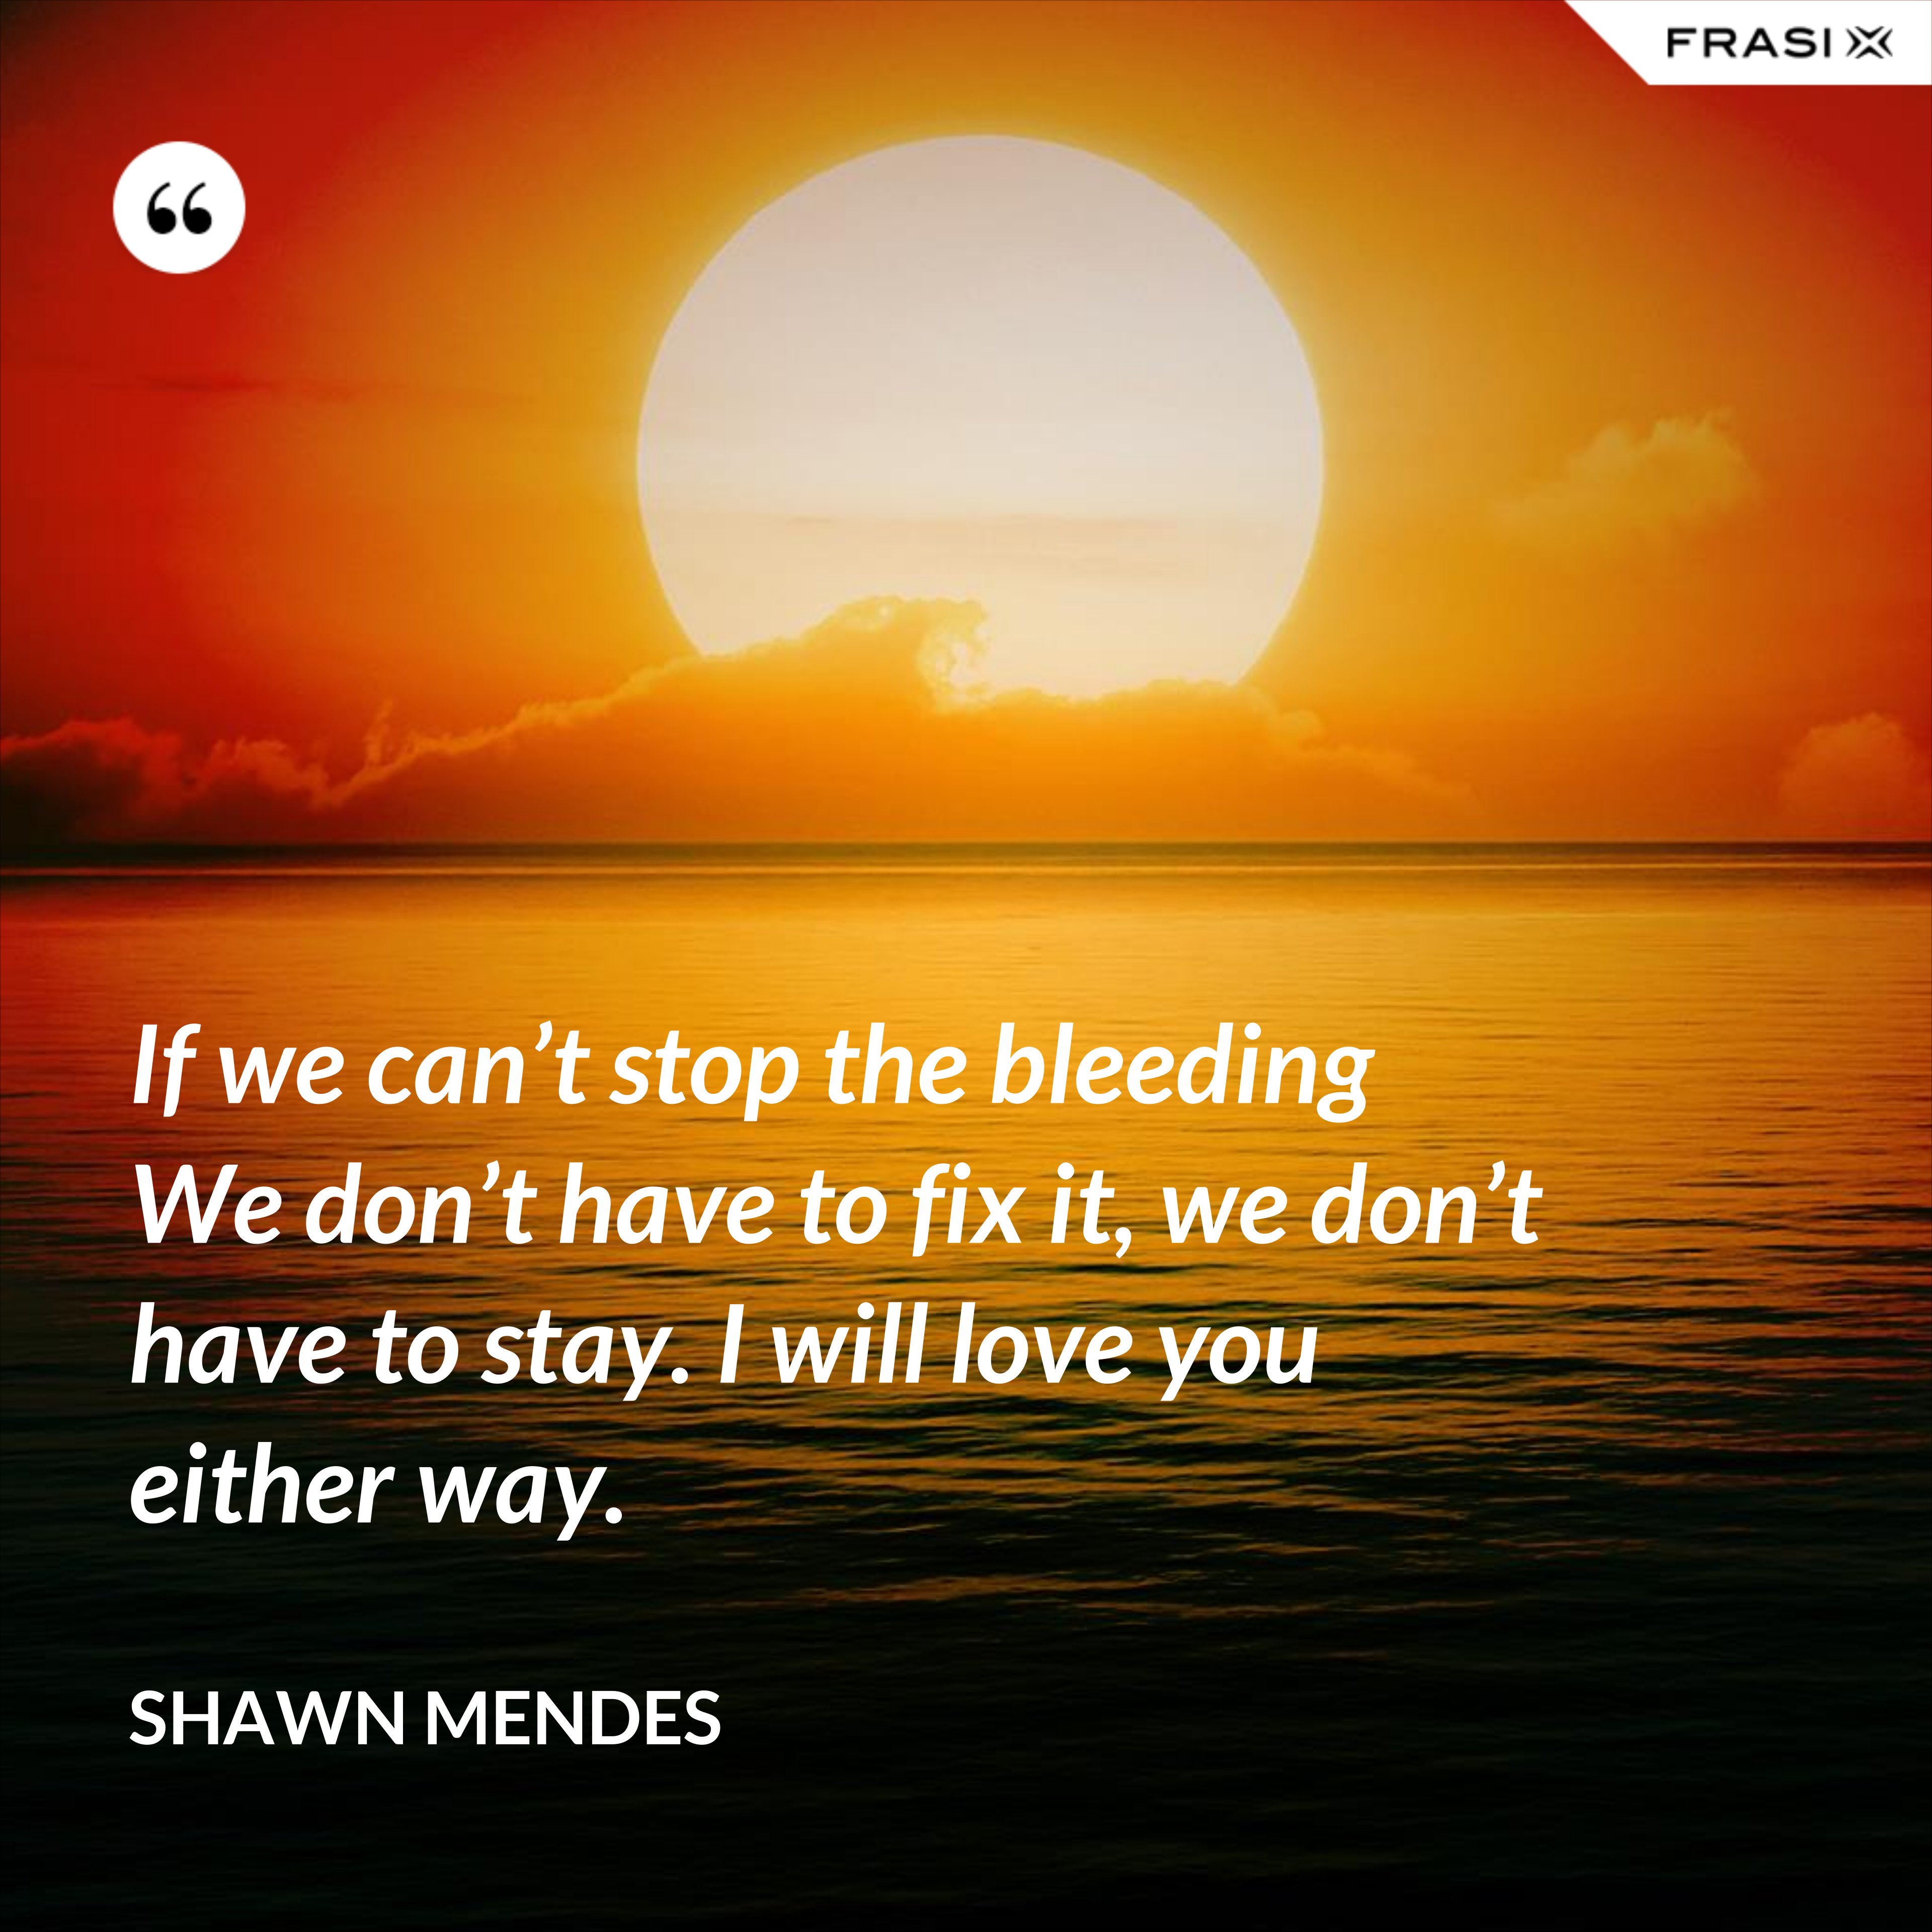 If we can’t stop the bleeding We don’t have to fix it, we don’t have to stay. I will love you either way. - Shawn Mendes